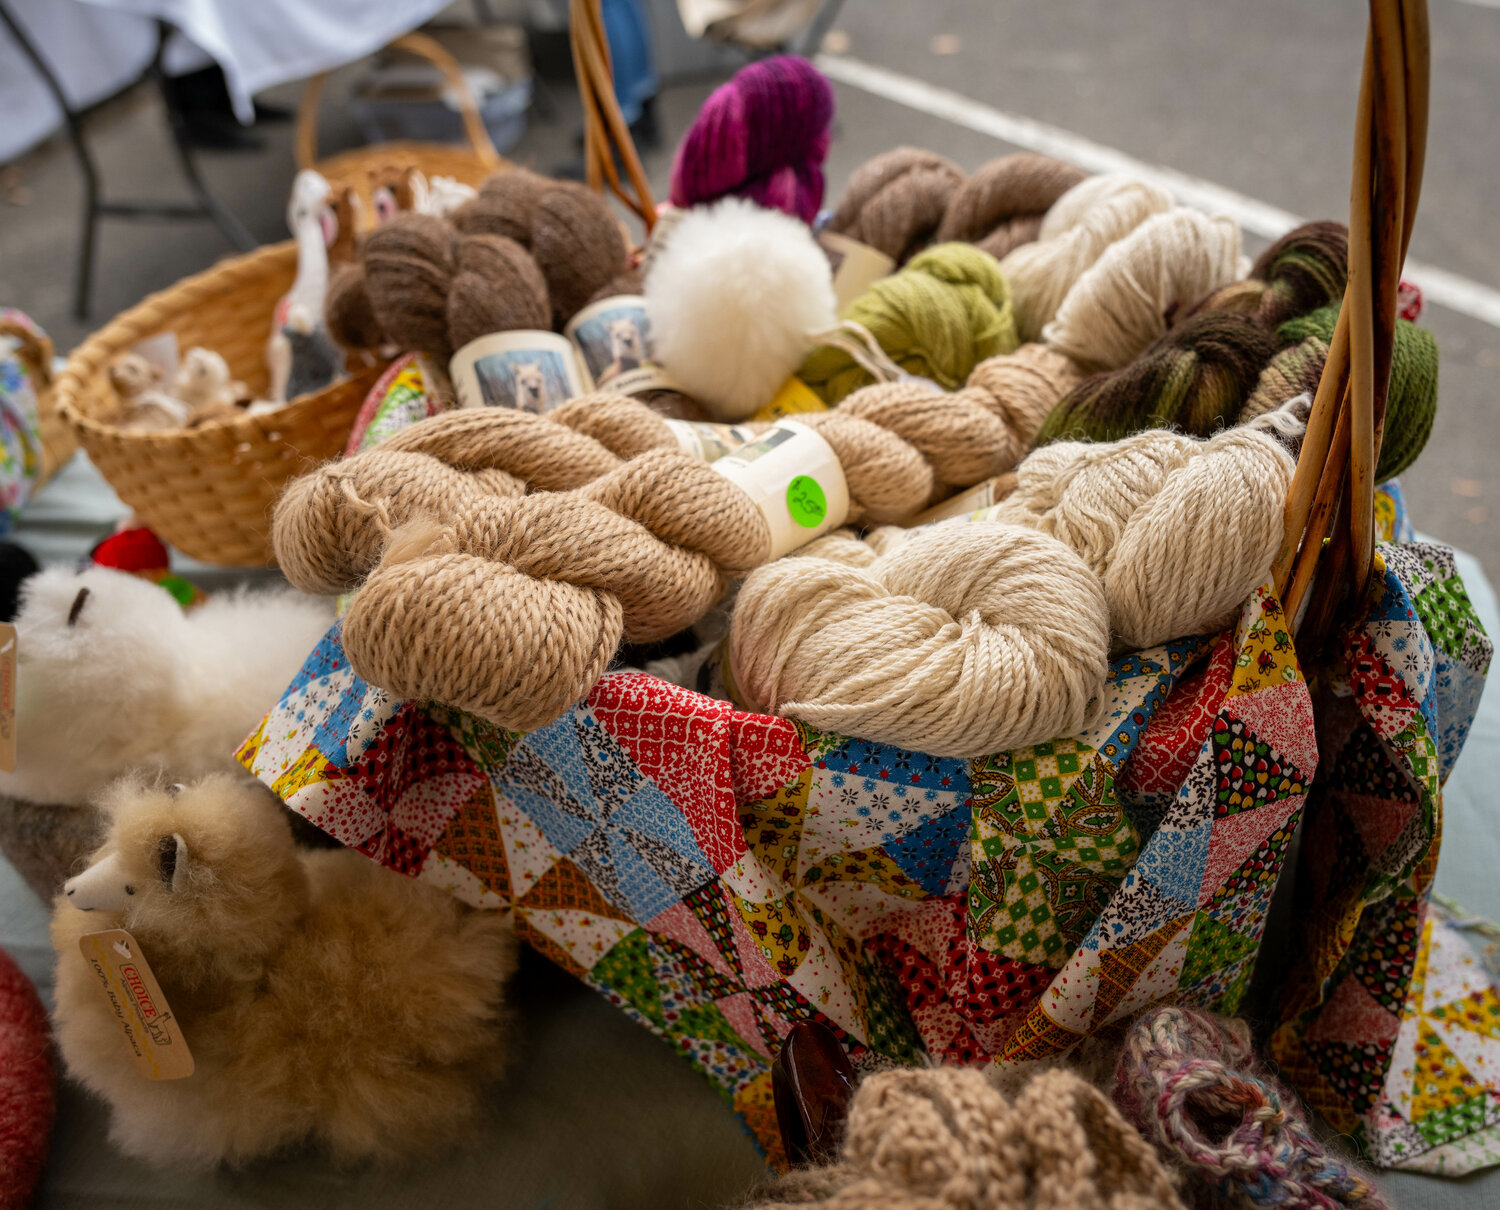 Hobble Hill Farm in Bedminster Township sells items made of wool from Suri alpacas at the Yardley Farmers Market.